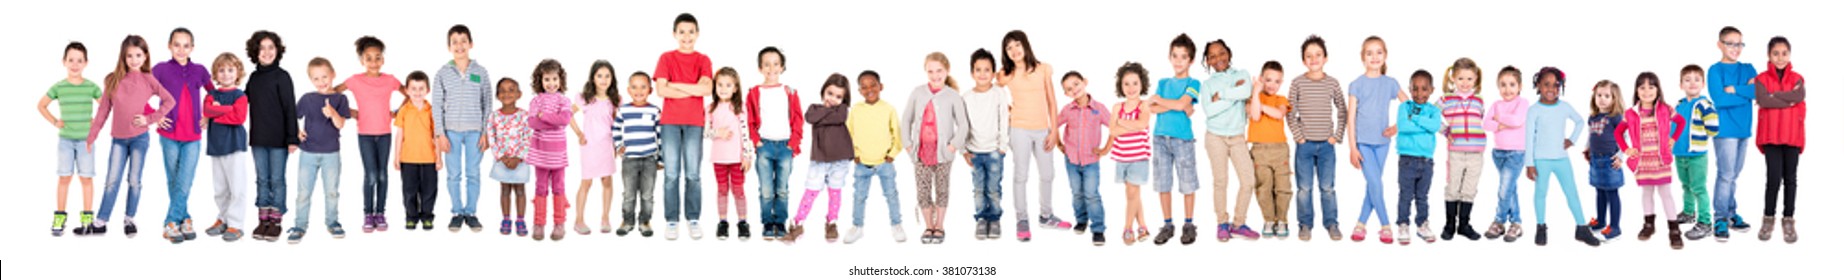 Large group of children posing isolated in white - Shutterstock ID 381073138